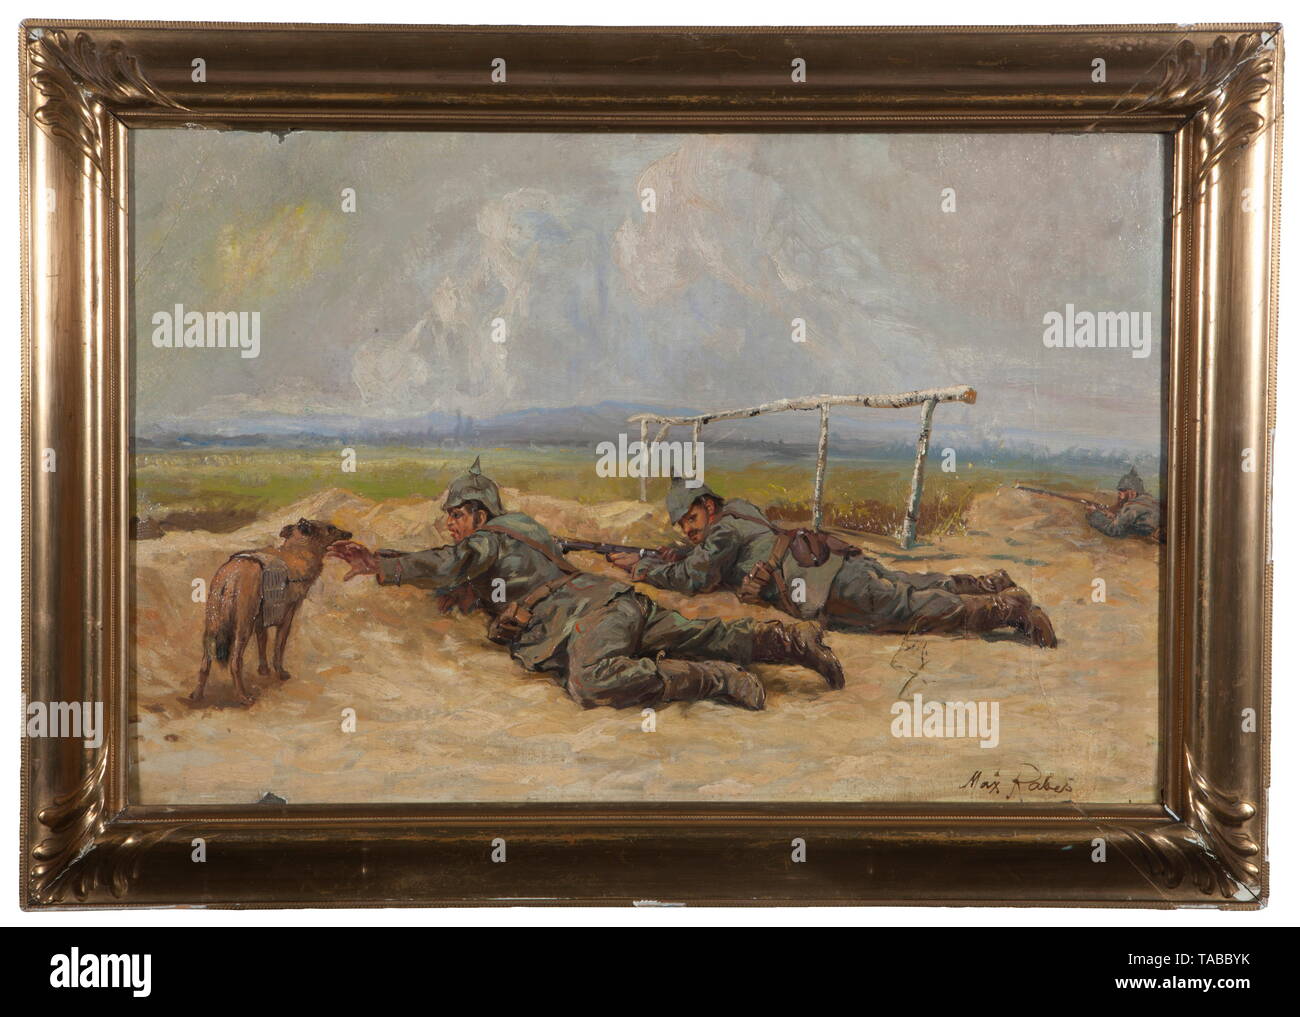 Geheimrat Prof. Dr. Max Rabes (1868 - 1944) 'Munitions' (62.5 x 40 cm), painting on wood depicting two World War I German Landsers (Infantrymen) with medical service dog. Artist signed lower left corner. Gilt plaster framed (50 x 75 cm). Max Rabes, born 17 April 1868 in Samter, Prussian province of Posen. Attended Munich School of Art under the tutorship of Paul Graeb, became an illustrator, sculptor, and artist. Best known for Orientalist paintings, but painted many Mediterranean scenes, and multiple World War I battle scenes showing German Land, Additional-Rights-Clearance-Info-Not-Available Stock Photo